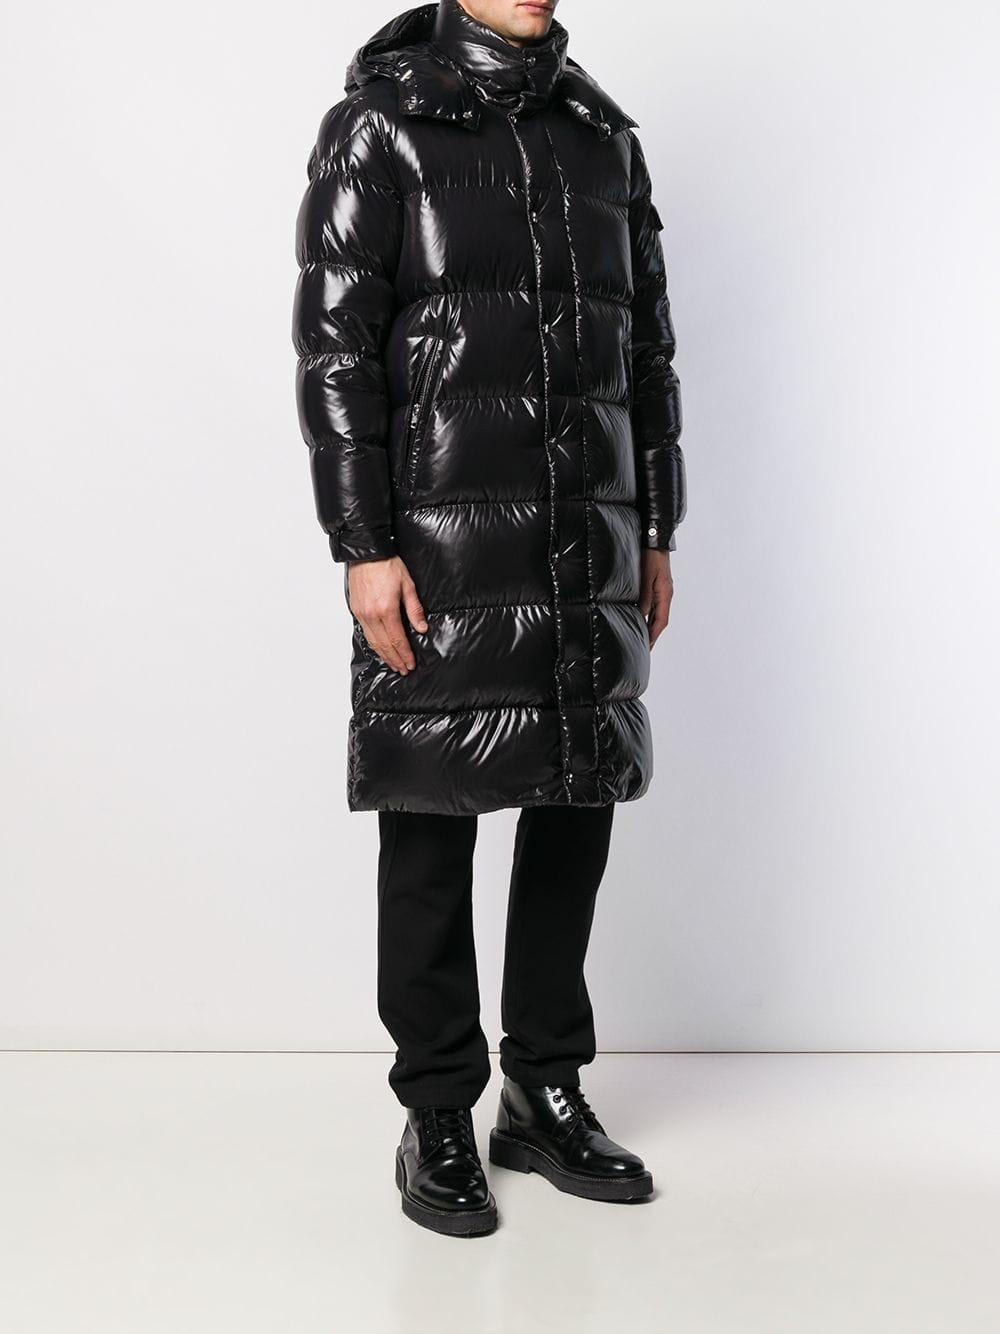 Moncler Synthetic Hanoverian Quilted Zip-up Coat in Black for Men - Lyst